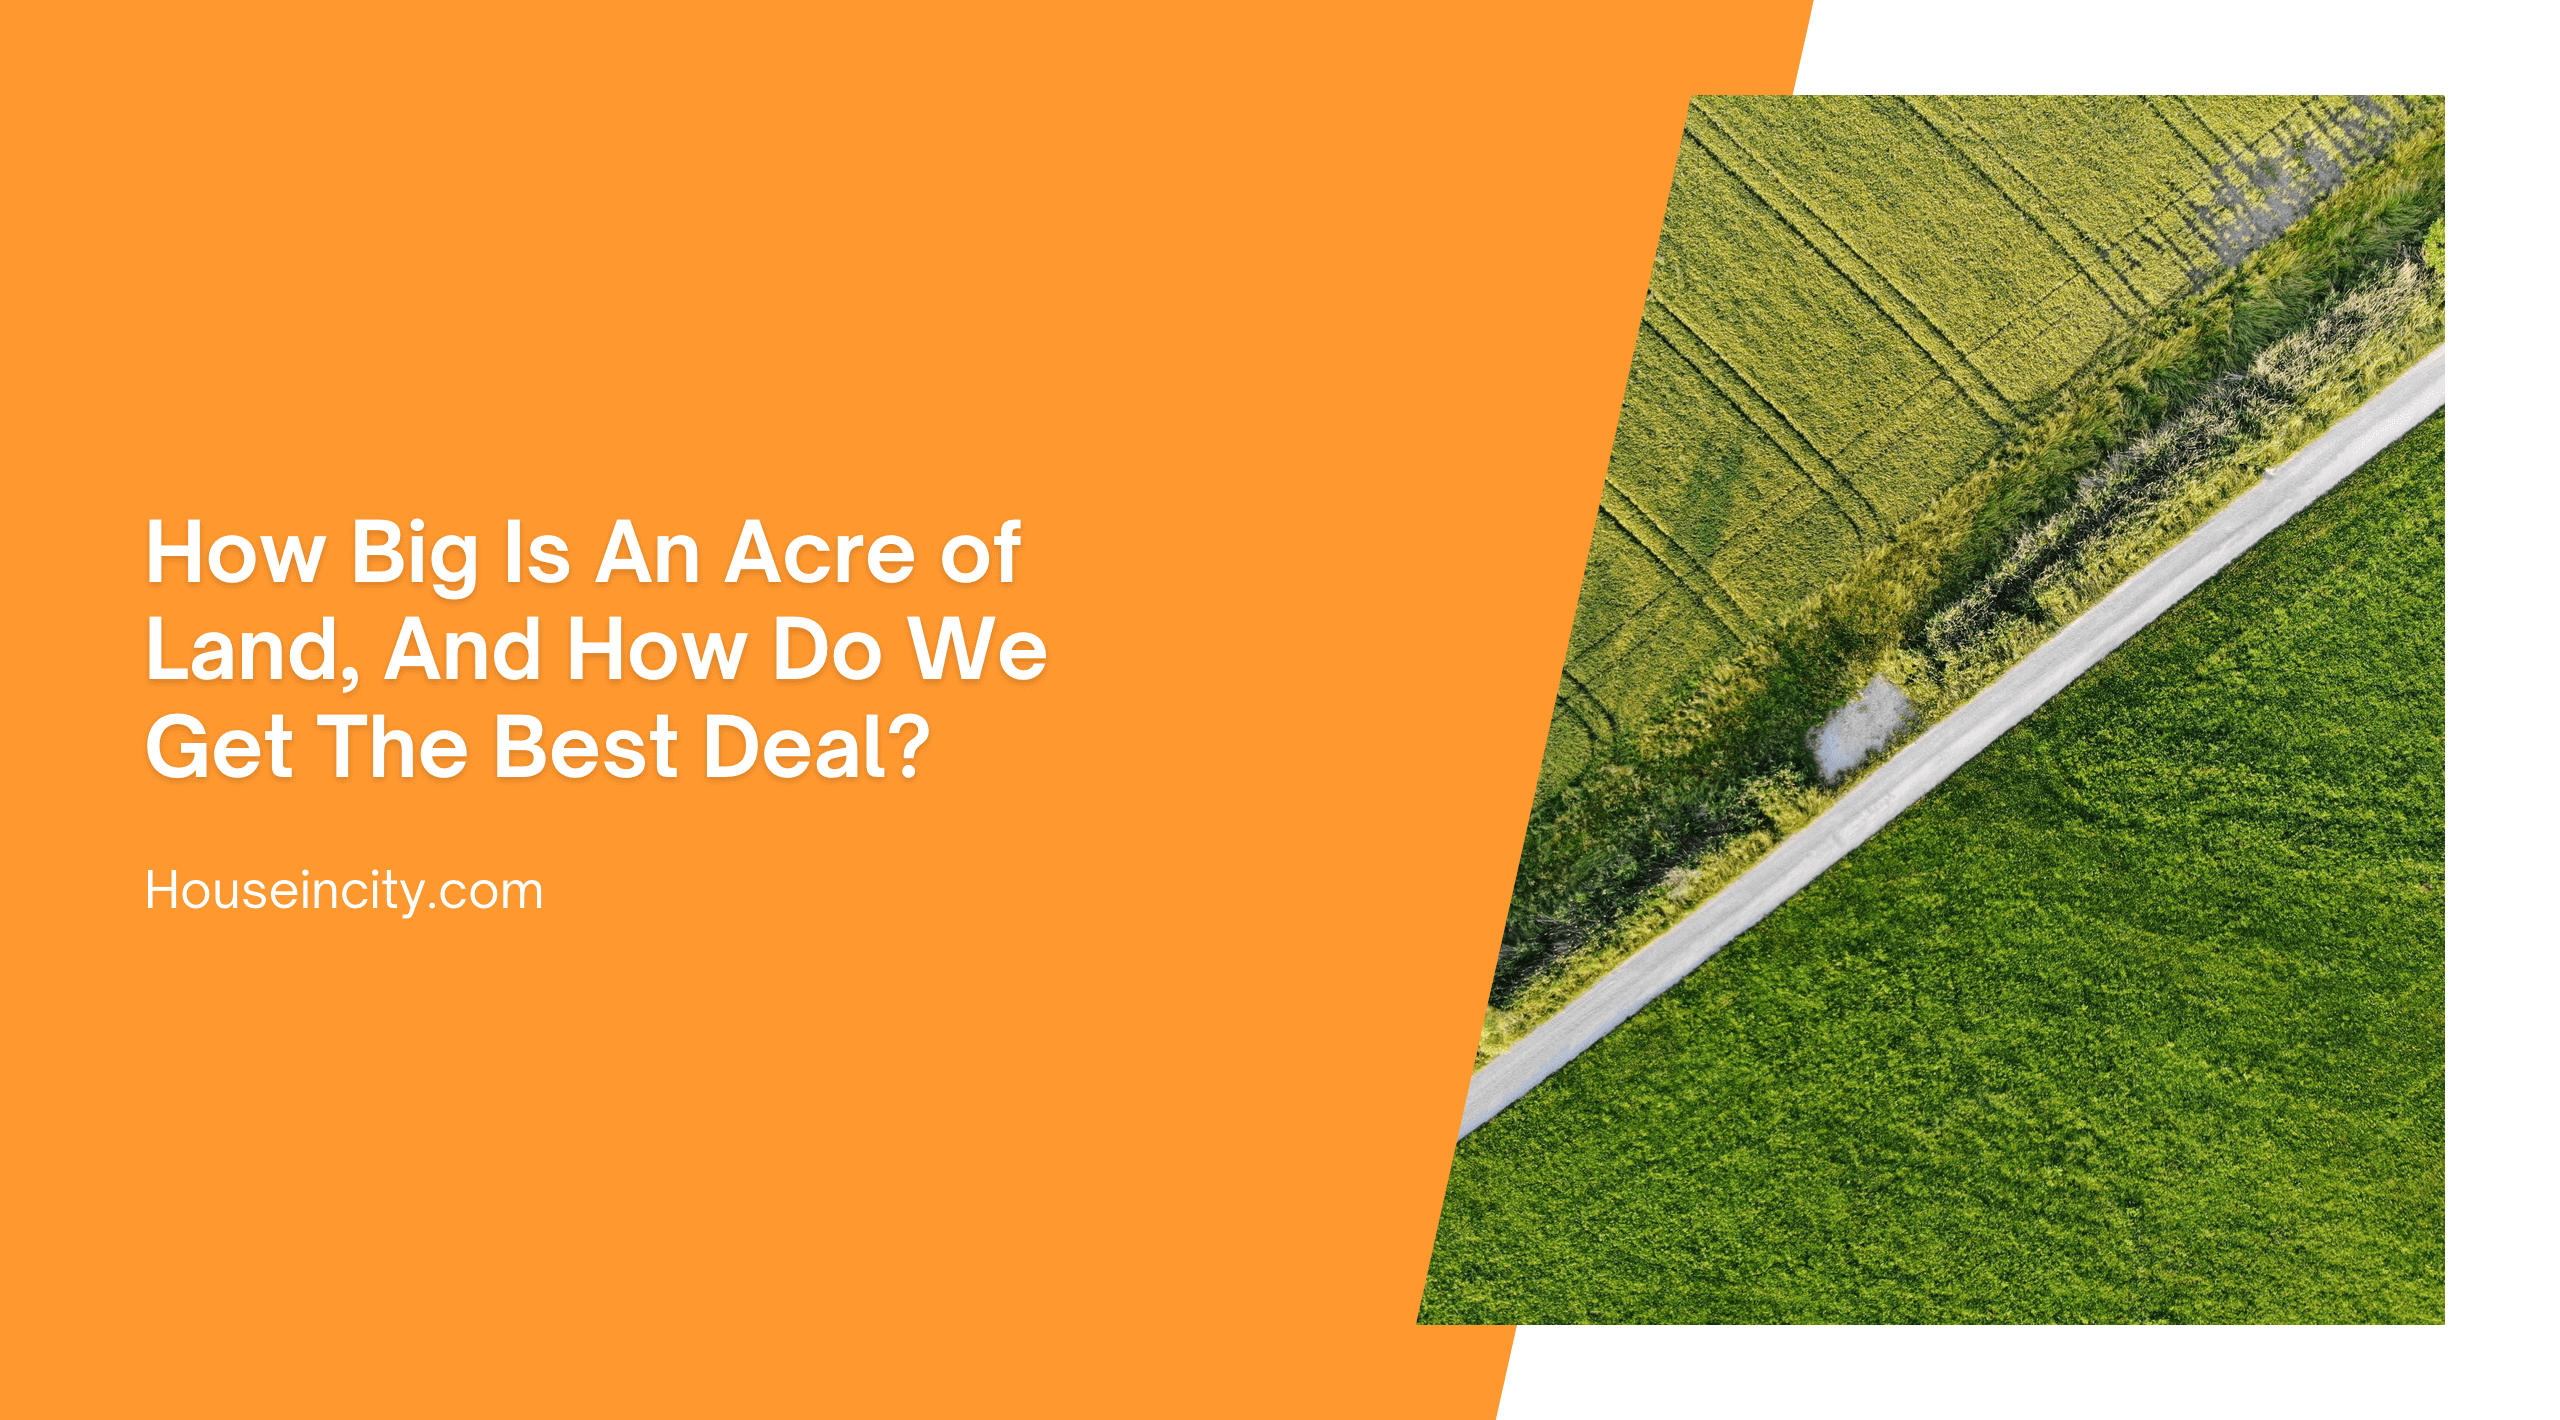 How Big Is An Acre of Land, And How Do We Get The Best Deal?